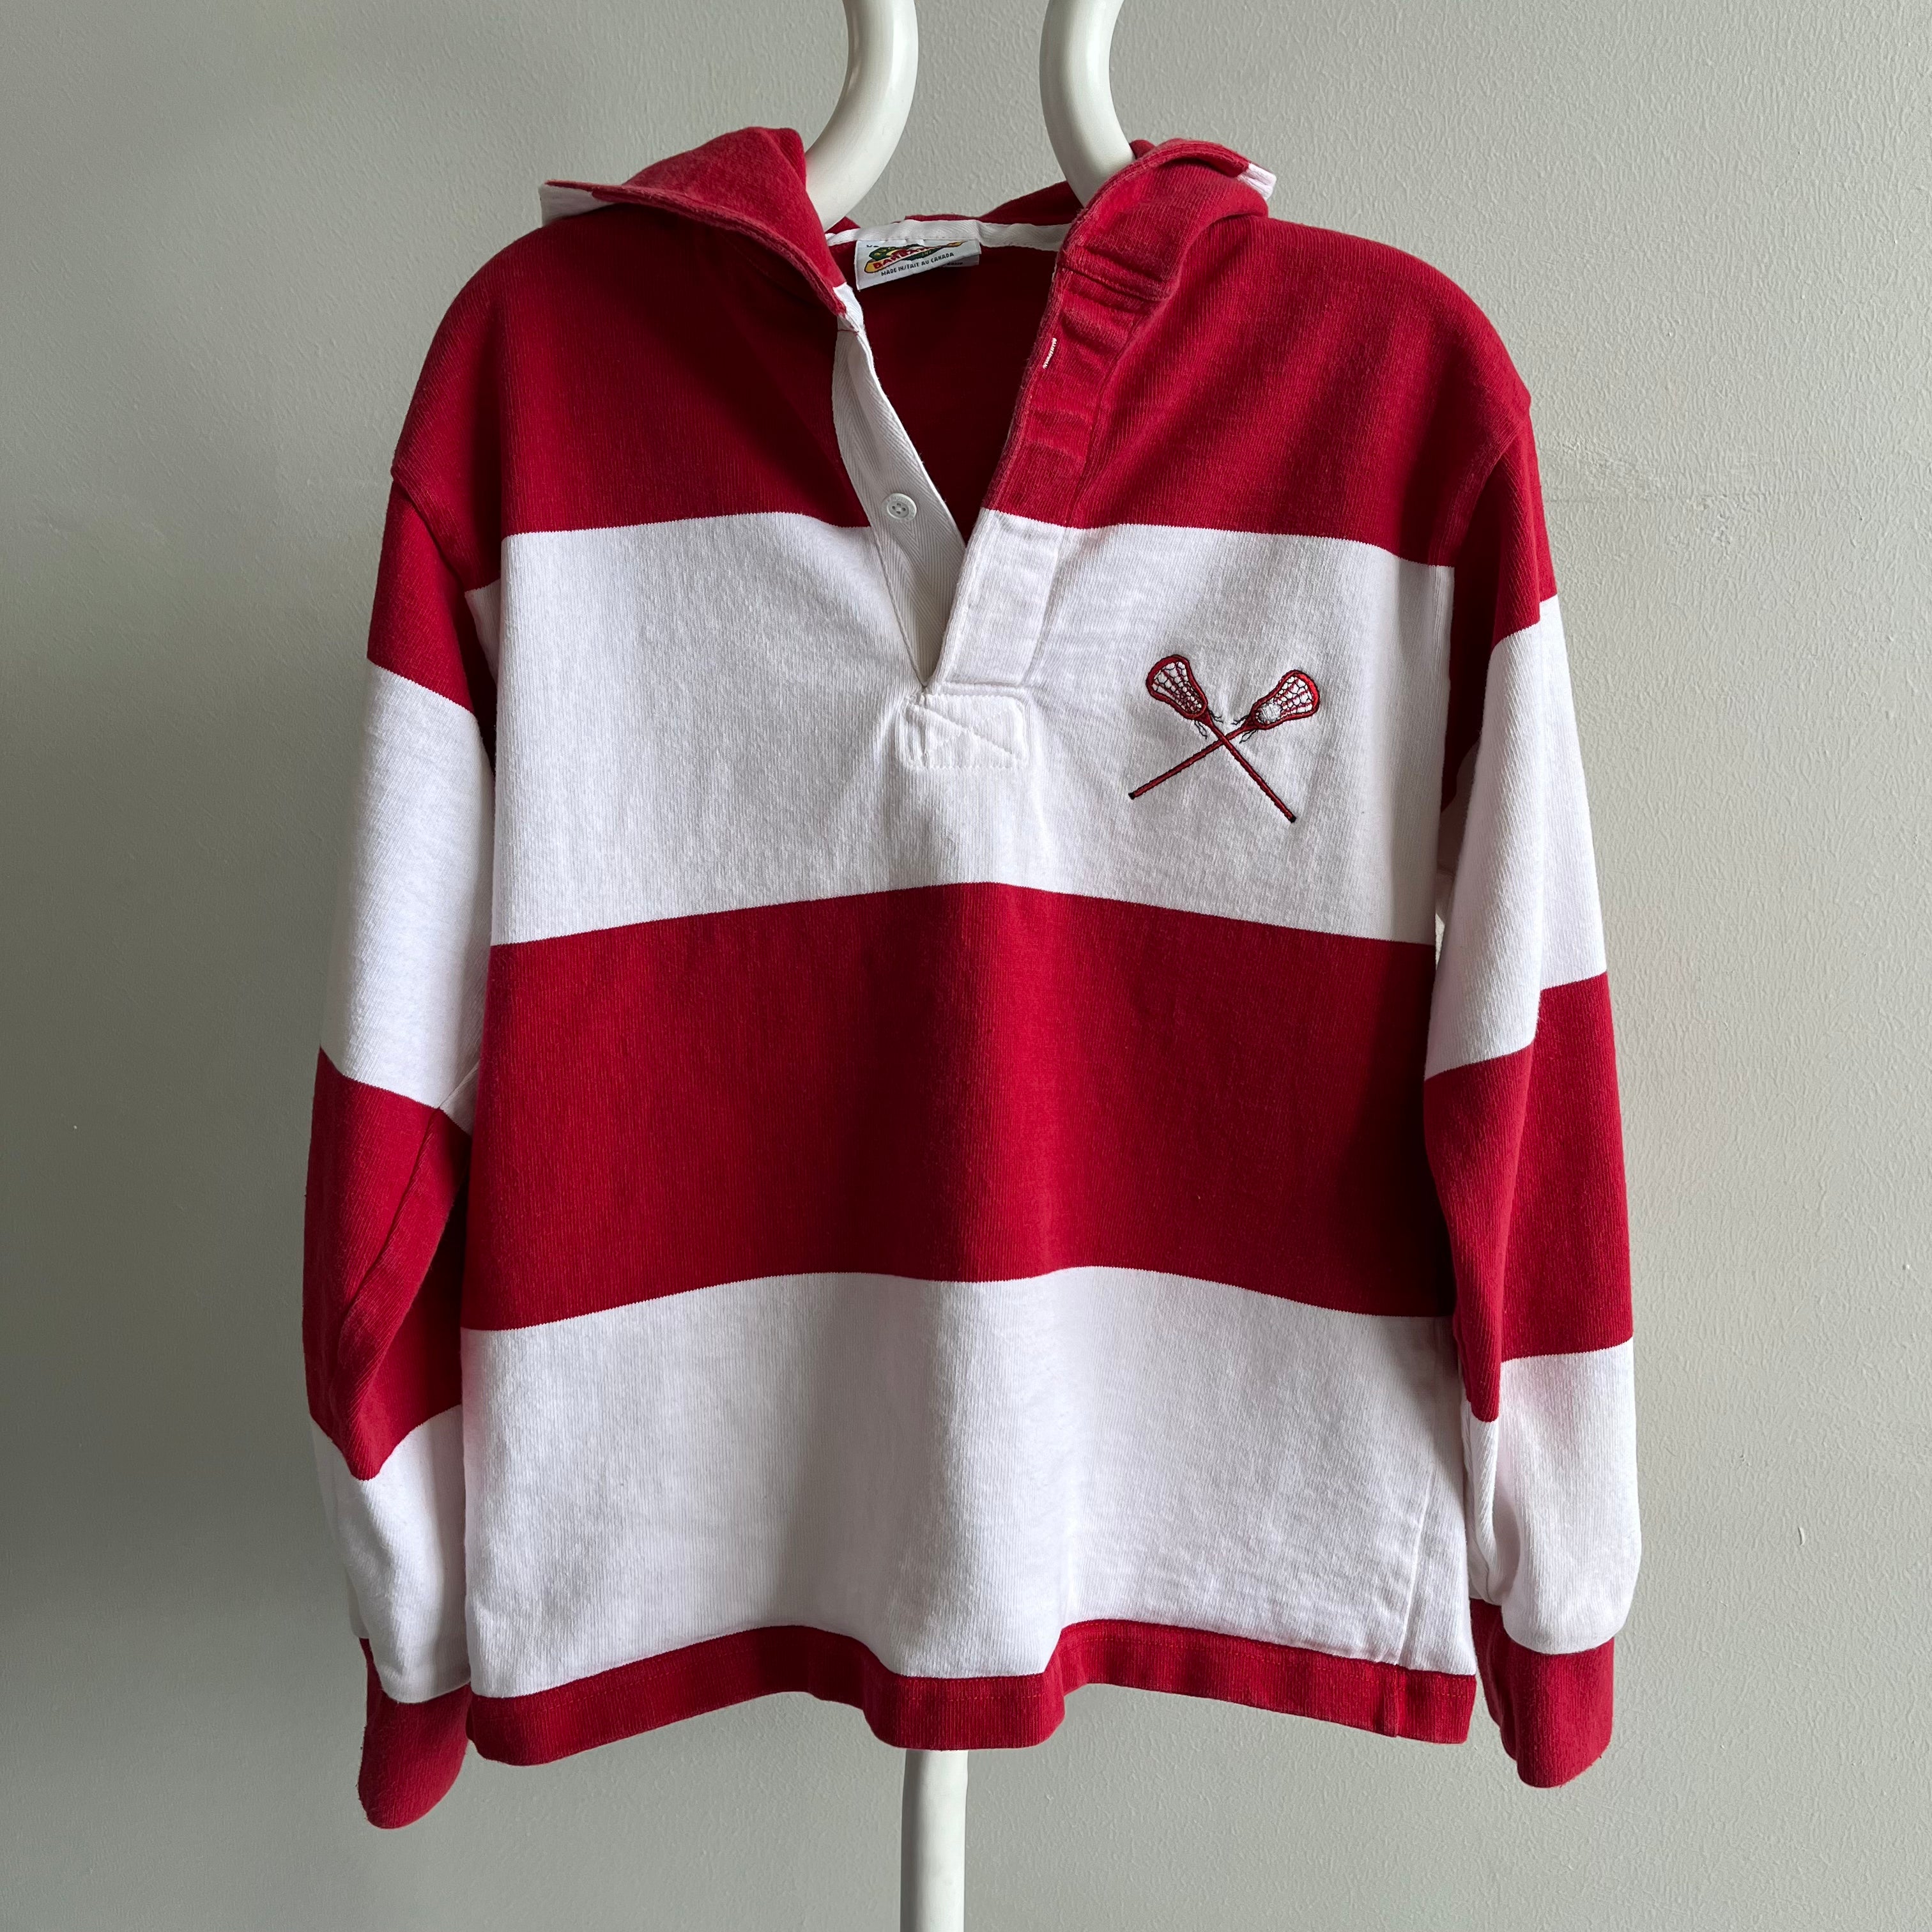 1990s Rad Hooded Rugby LaCrosse Shirt - Rare Smaller Size